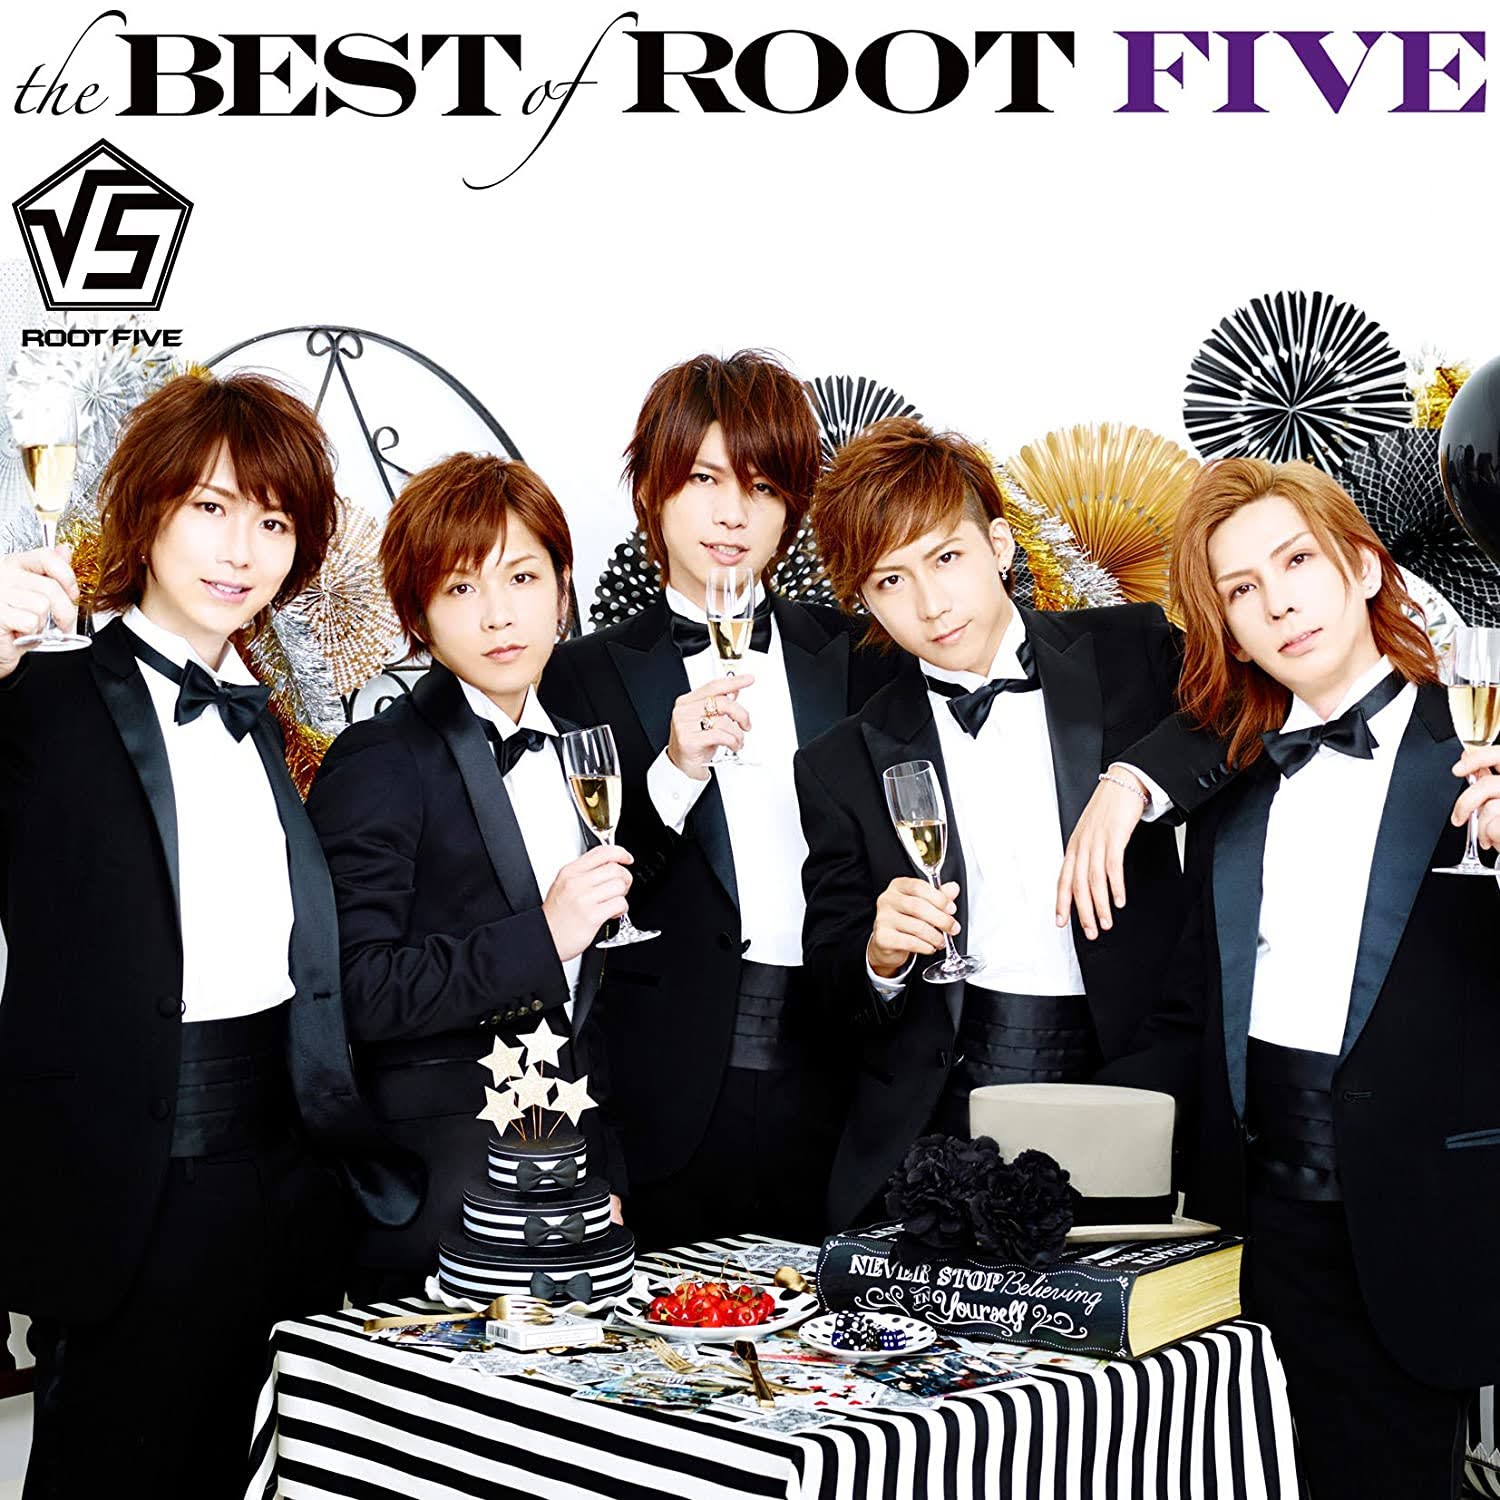 Capa do best álbum “the BEST of ROOT FIVE”– Limited Edition.